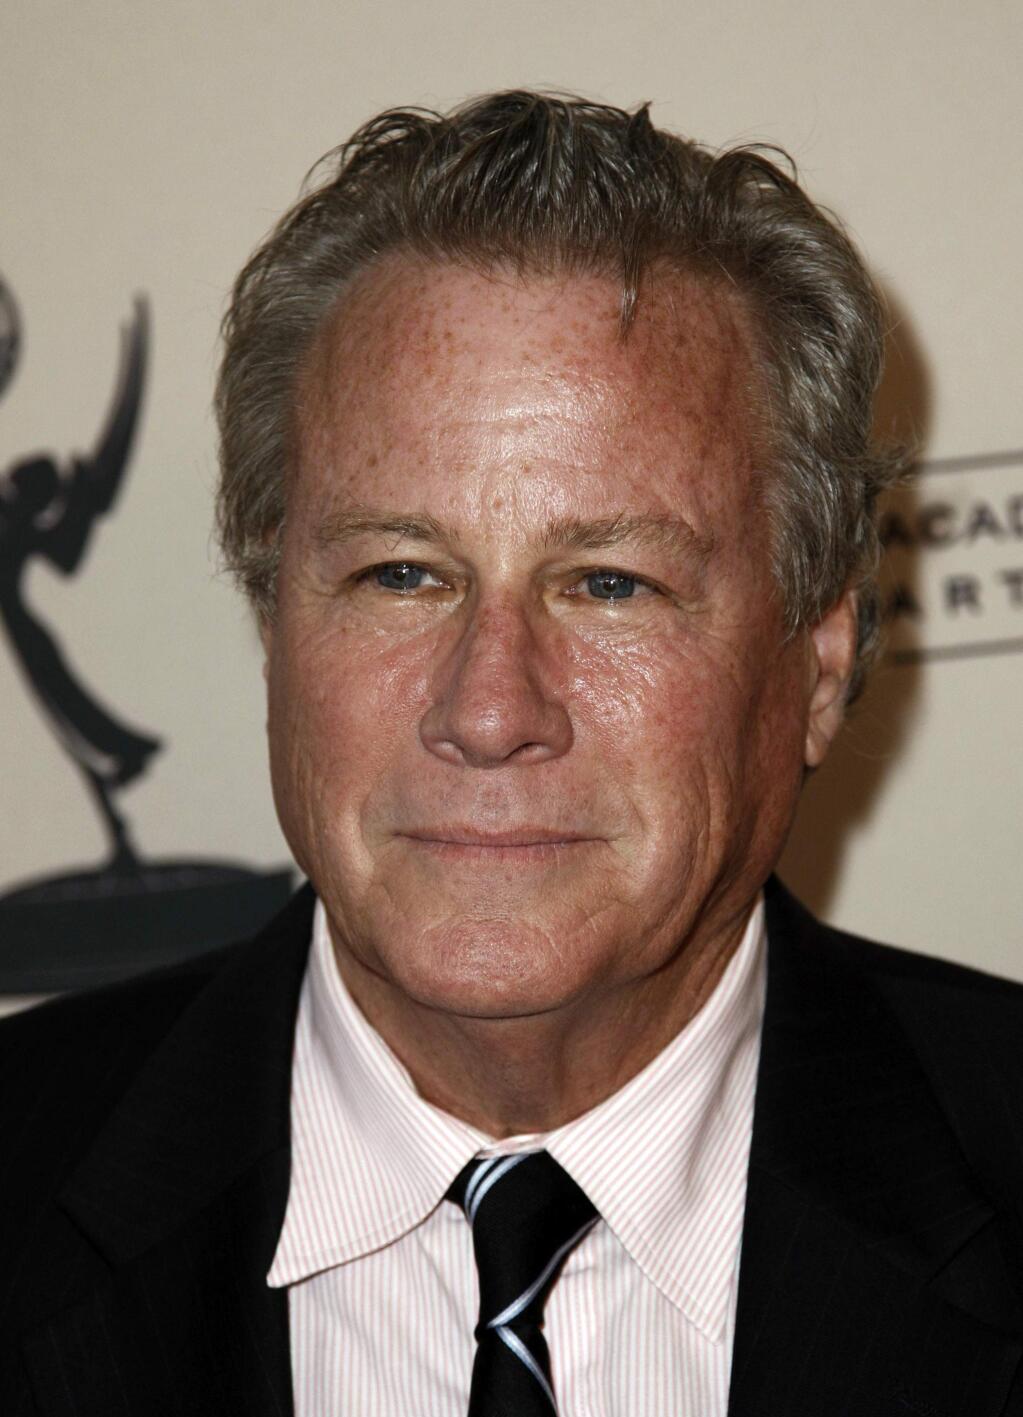 FILE - In this Sept. 12, 2011 file photo, actor John Heard arrives at Academy of Television Arts and Sciences Producers Peer Group celebration of the 63rd Primetime Emmy Awards in Los Angeles. Heard, best known for playing the father in the “Home Alone” movie series, has died. He was 72. His death was confirmed by the Santa Clara Medical Examiner's office in California on Saturday, July 22, 2017. (AP Photo/Matt Sayles)